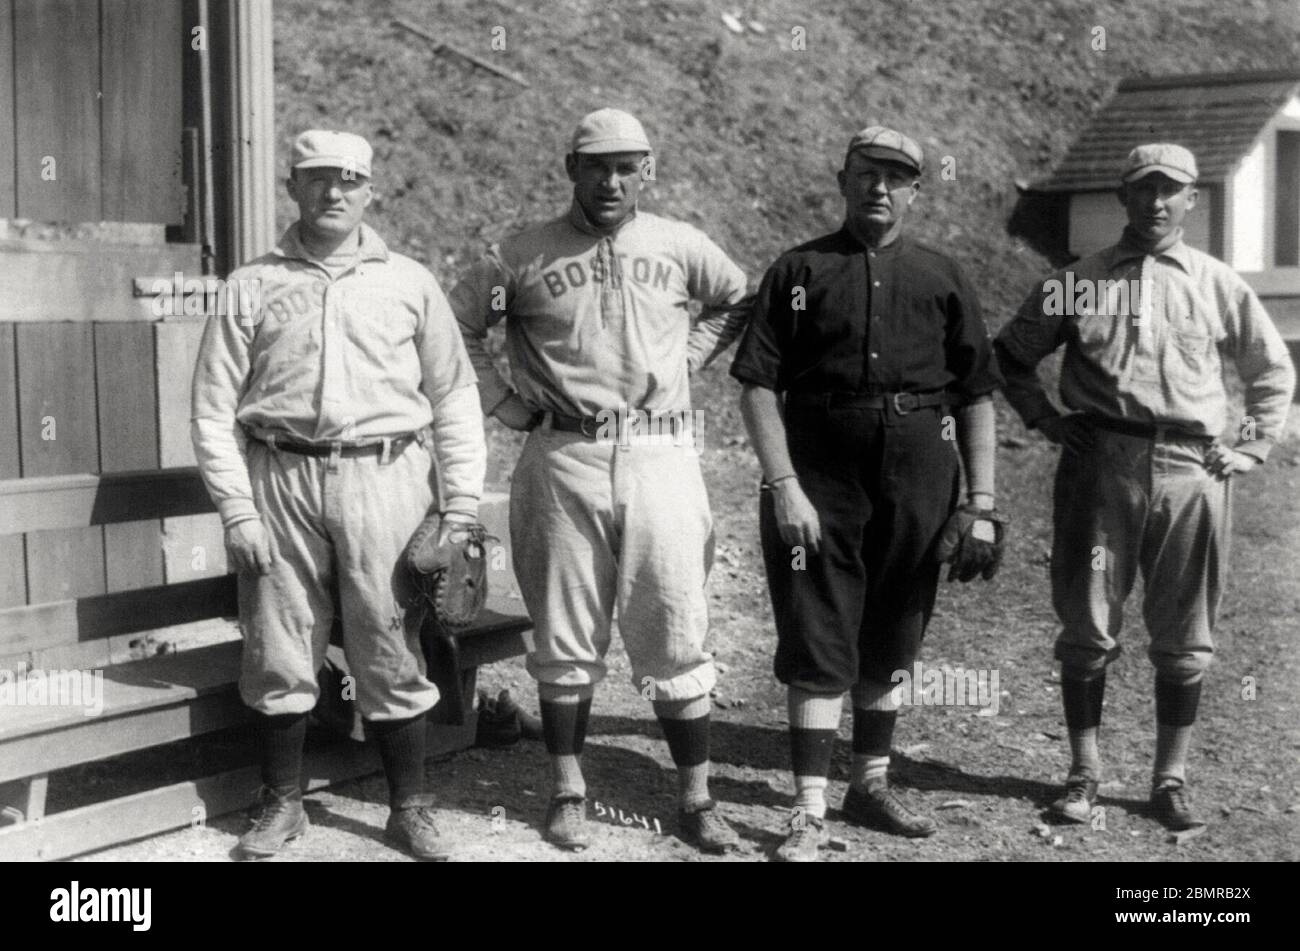 Bill Carrigan, Jake Stahl, Cy Young, Fred Anderson, Boston (baseball), 1912 Foto Stock